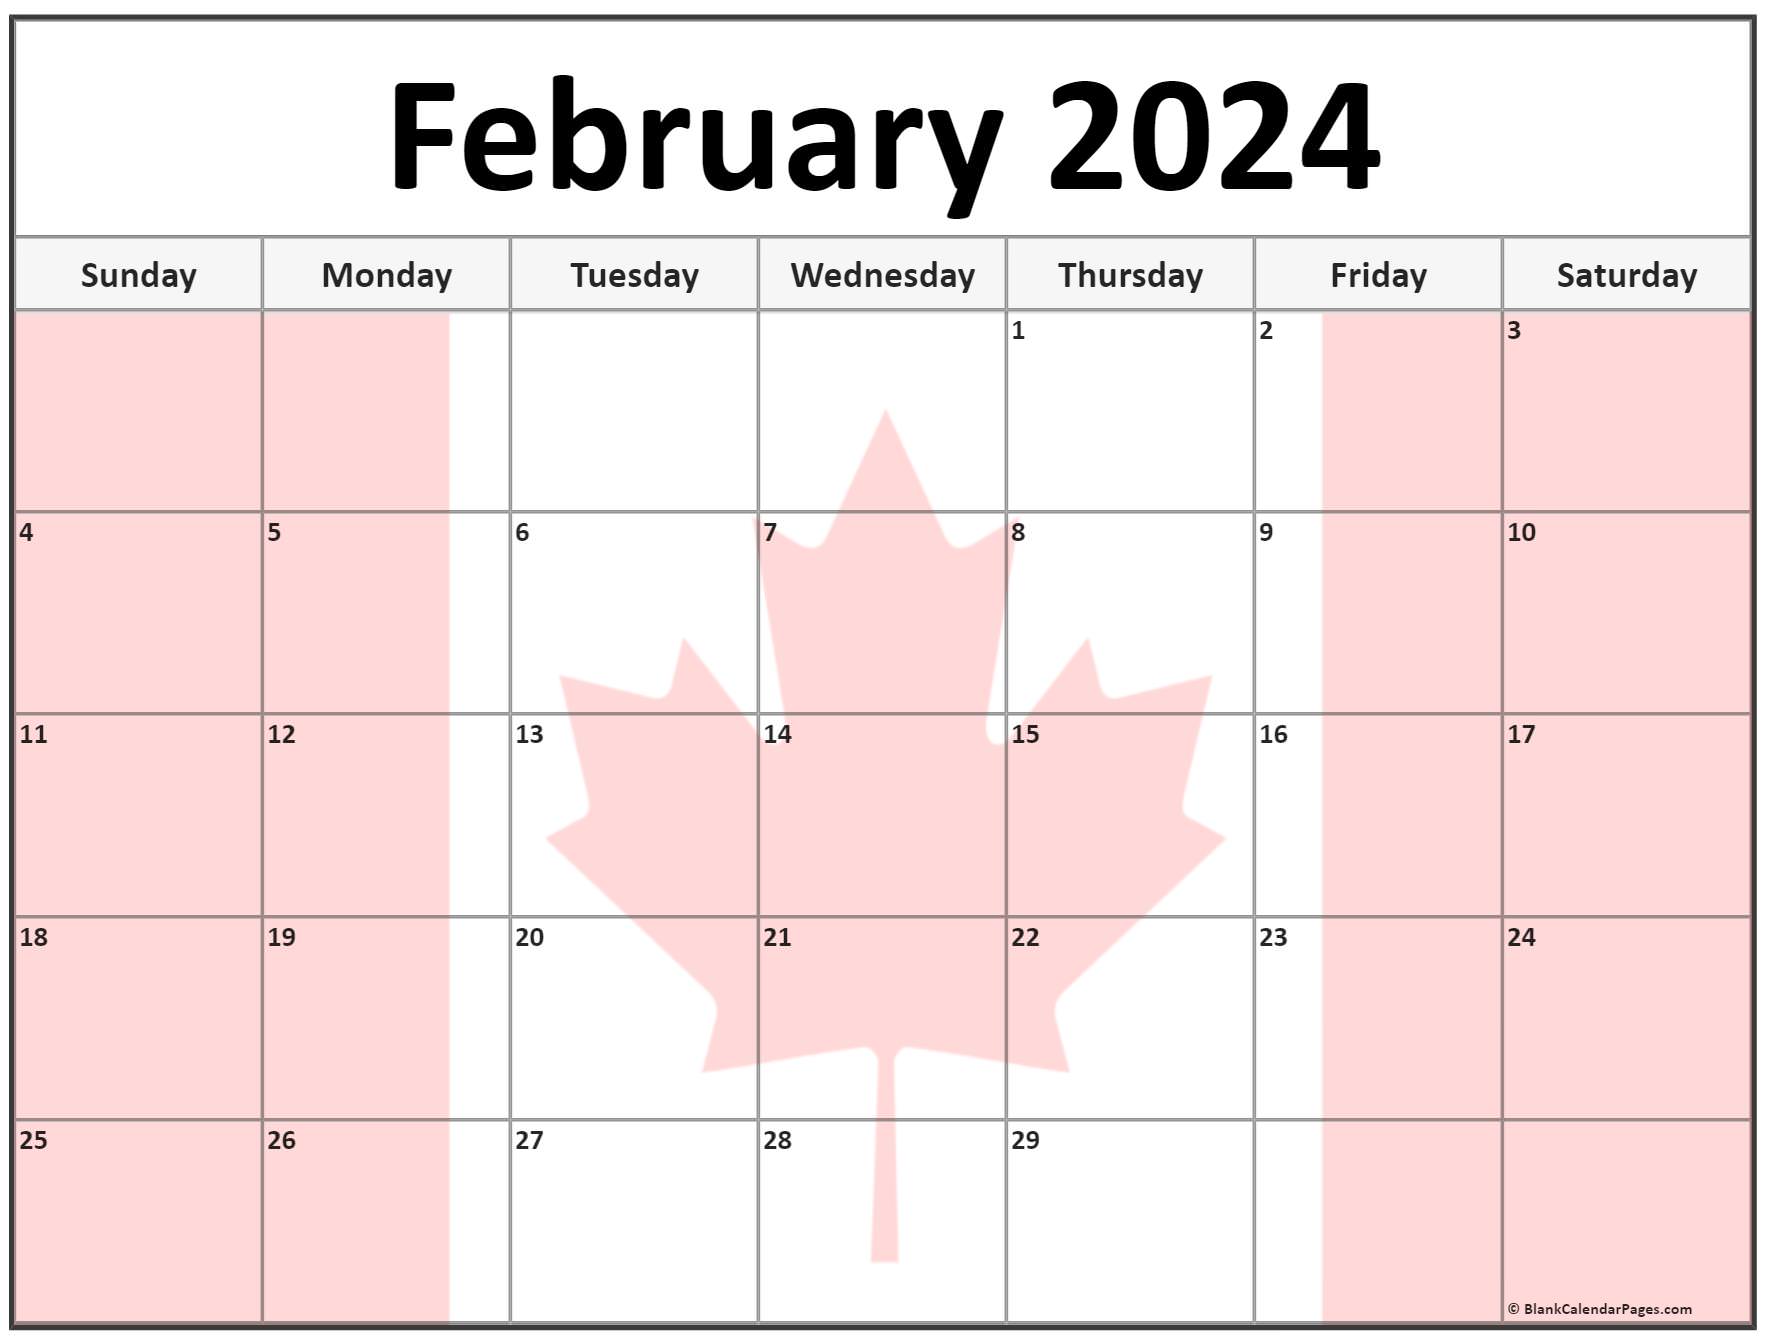 Collection of February 2024 photo calendars with image filters.